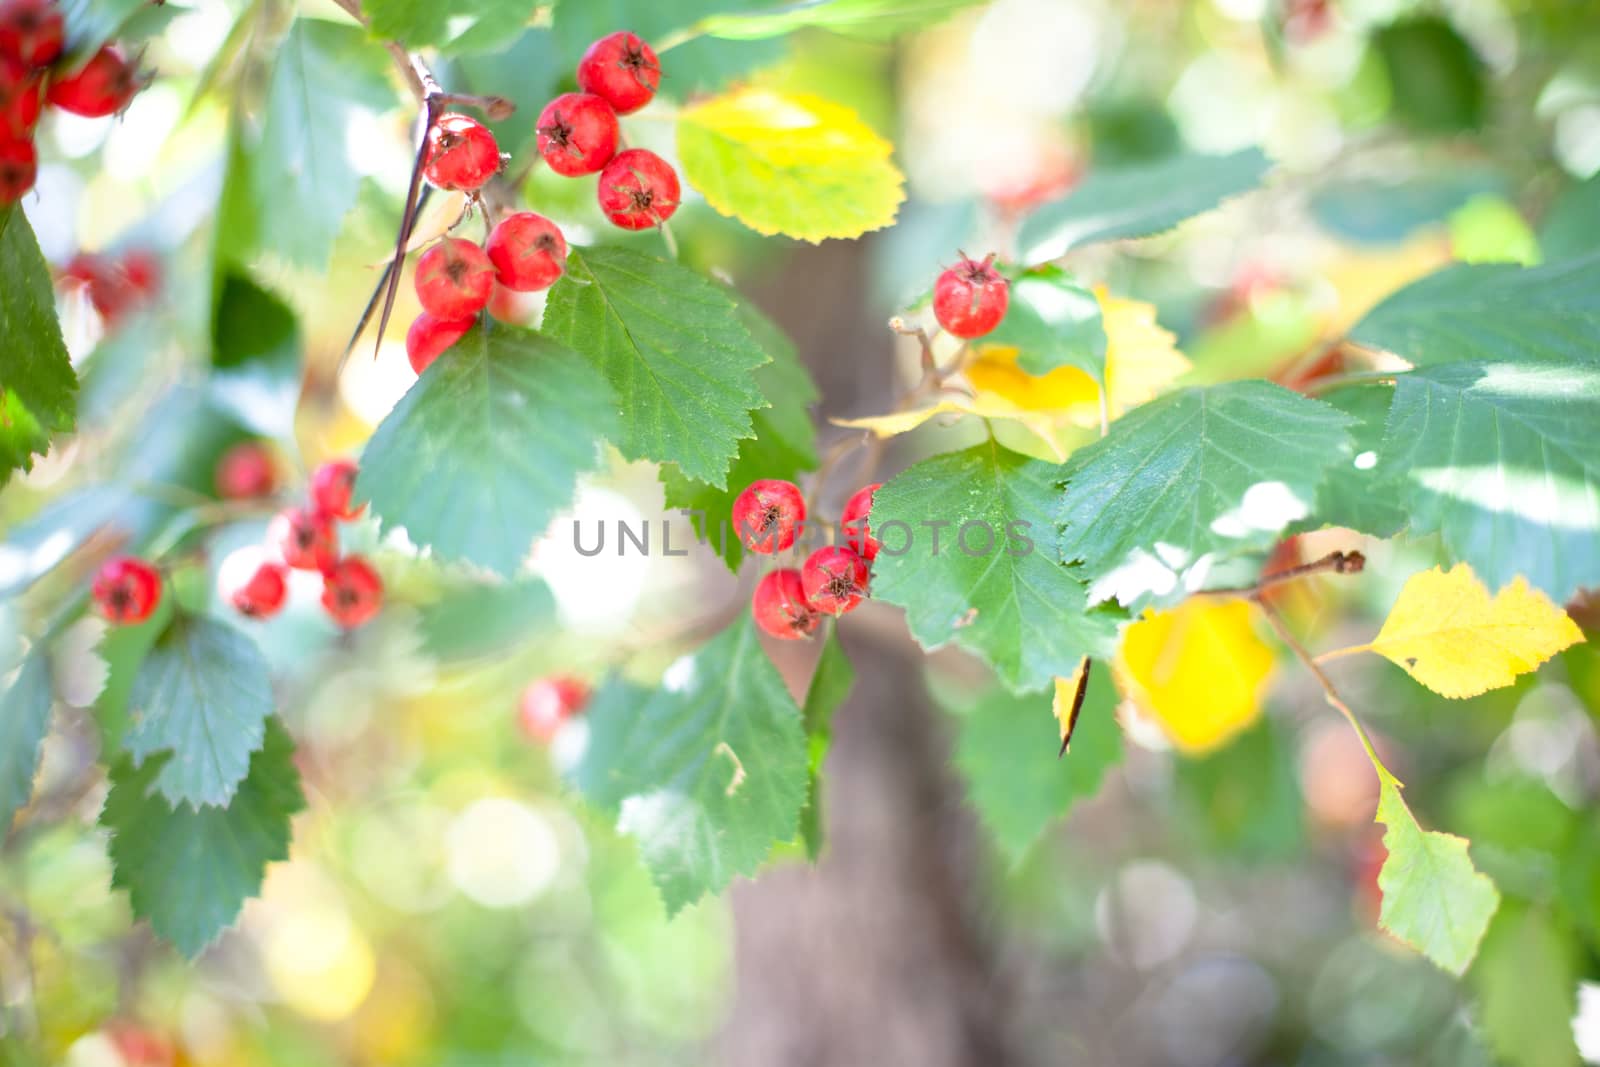 Red autumn berries by foaloce